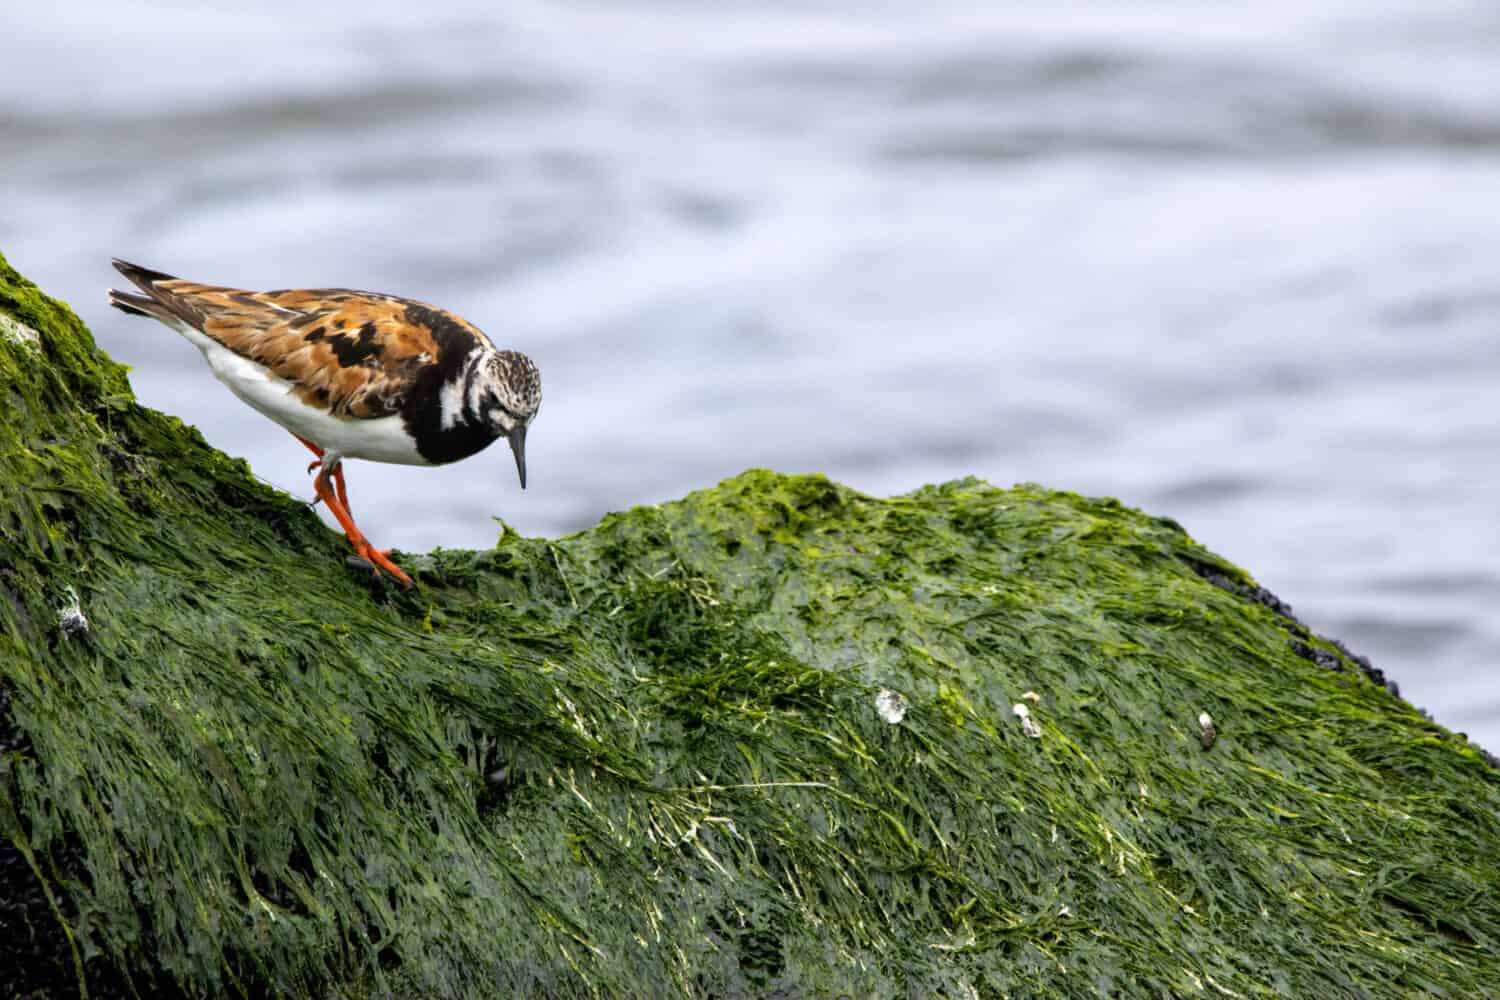 A ruddy turnstone standing on a rock at the shore.